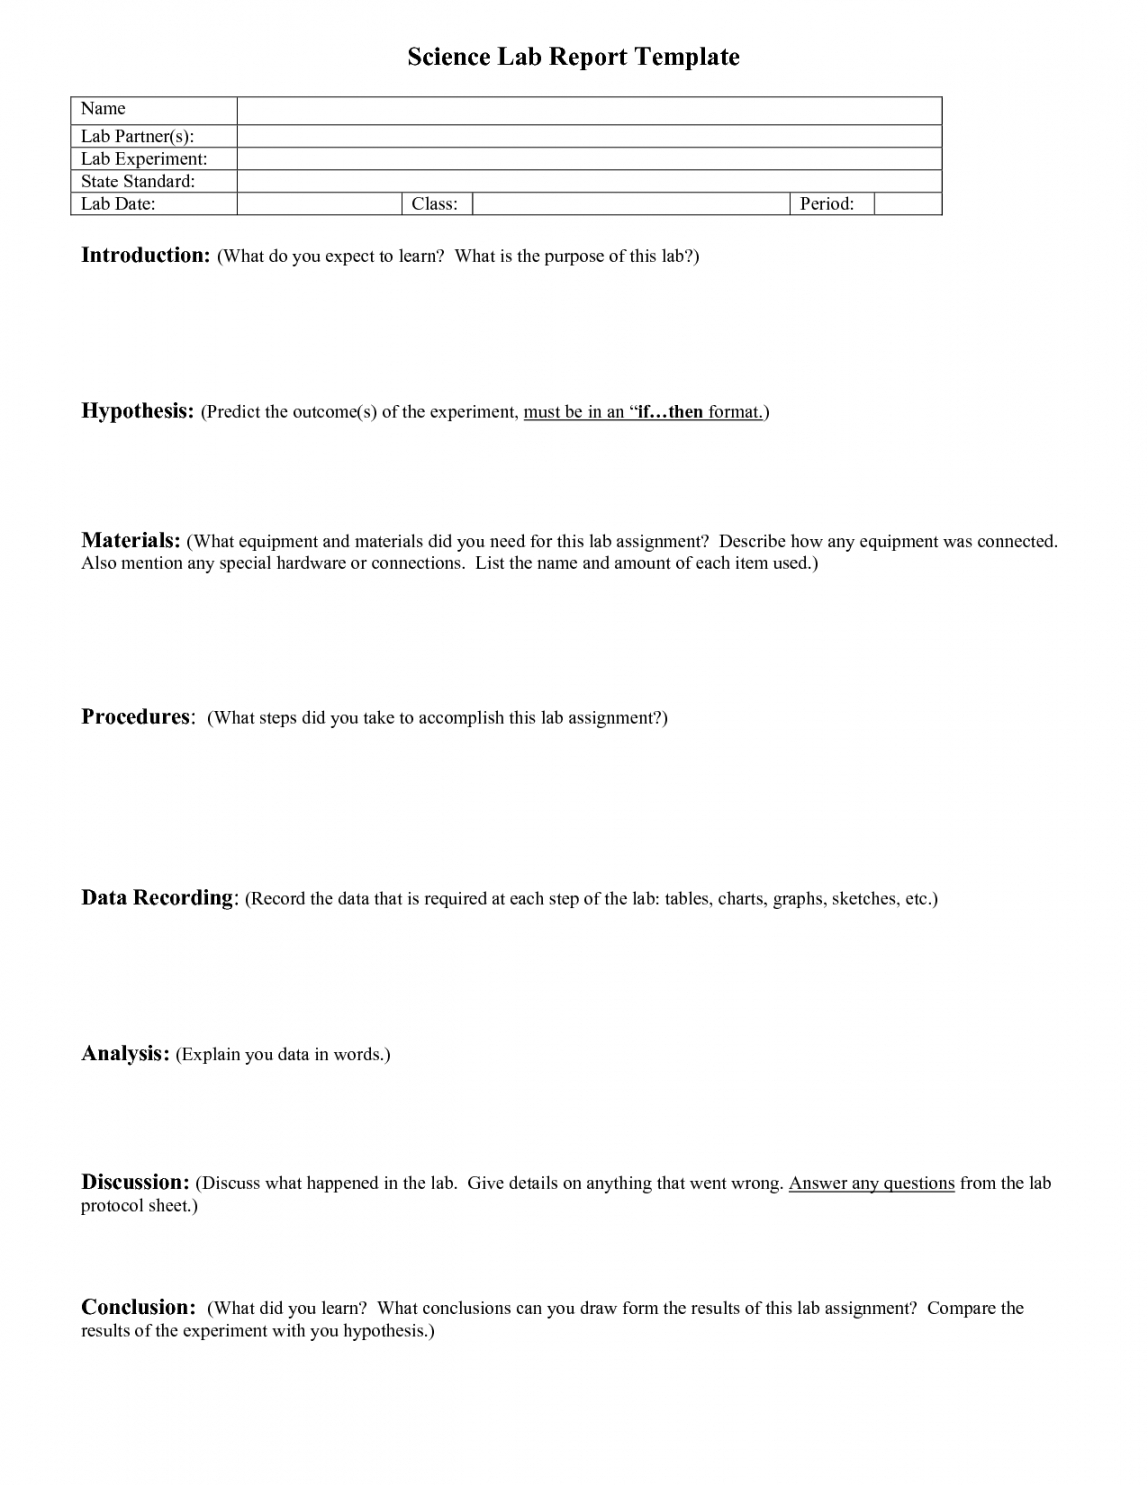 Free Lab Report Outline Science Lab Report Template School With Science Lab Report Template